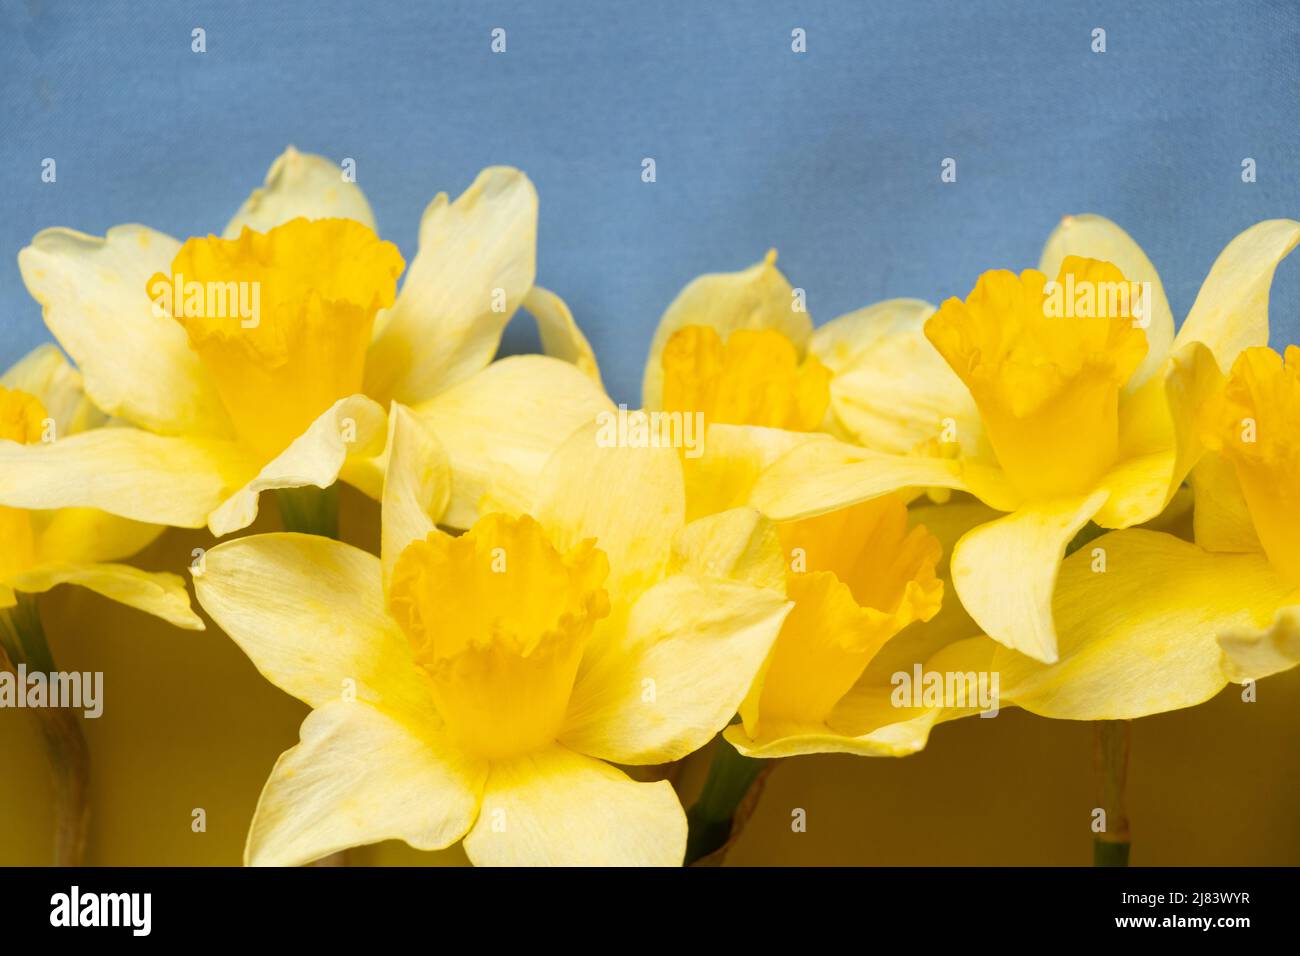 The flag of Ukraine is yellow-blue and yellow narcissus flowers, peace in Ukraine, stop the war 2022 Stock Photo